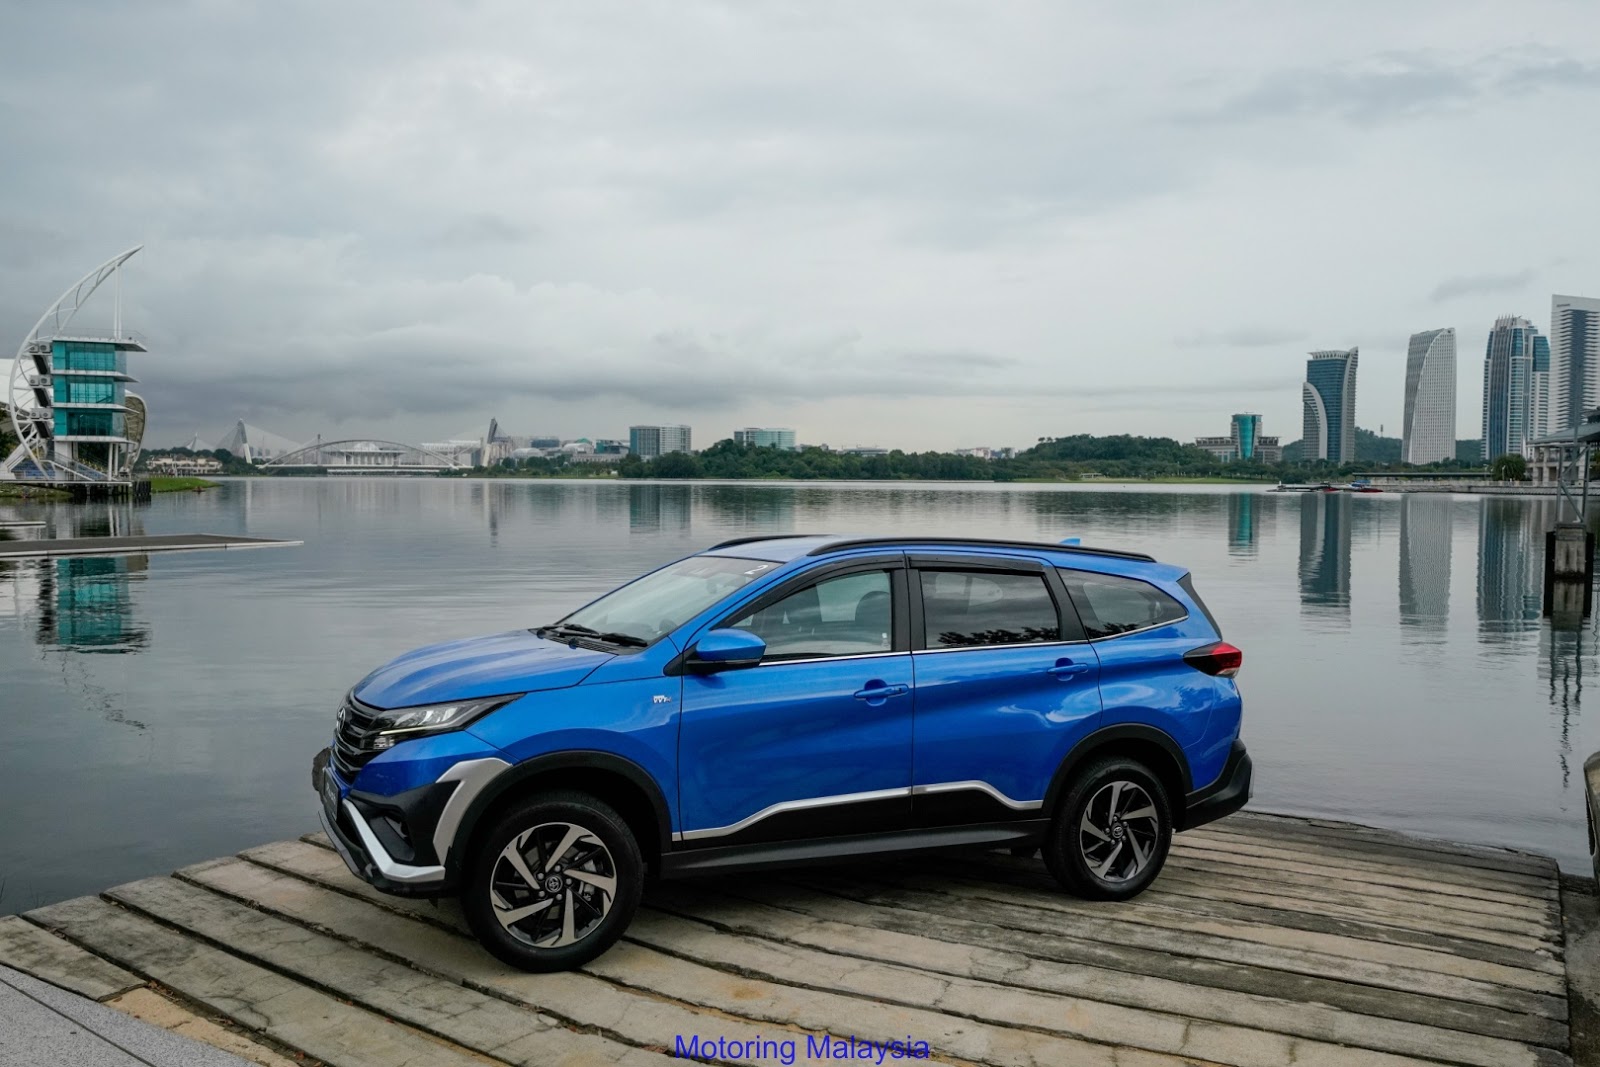 Motoring-Malaysia: The ALL-New Second Generation Toyota 